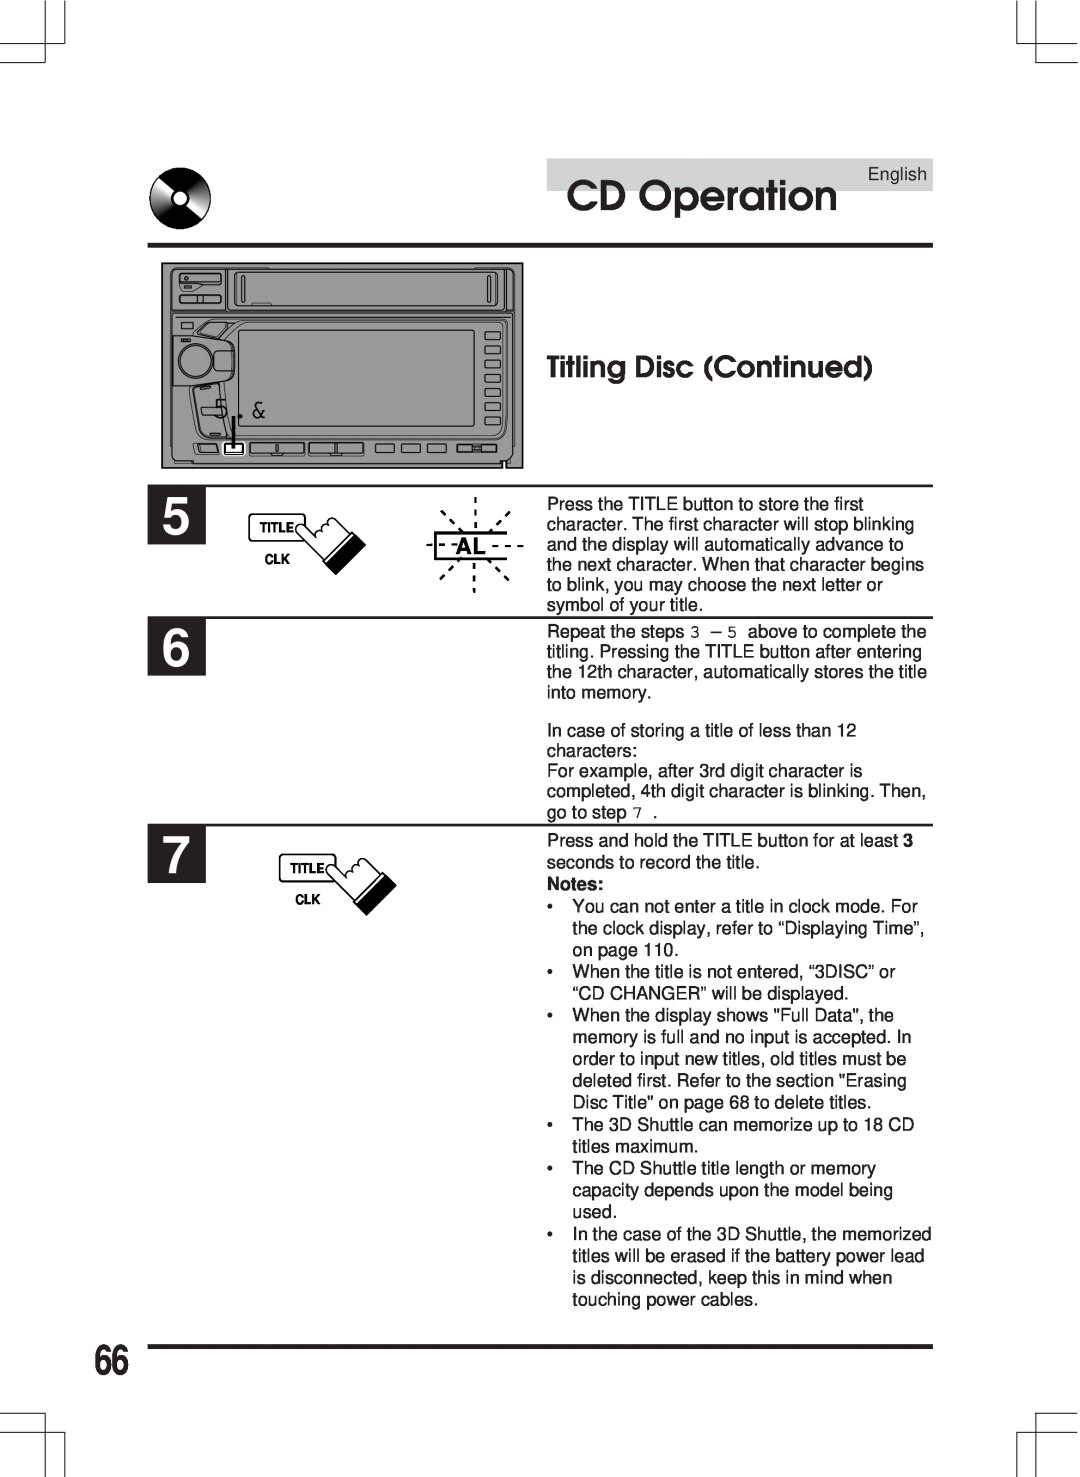 Alpine MDA-W890 owner manual Titling Disc Continued, CD Operation 